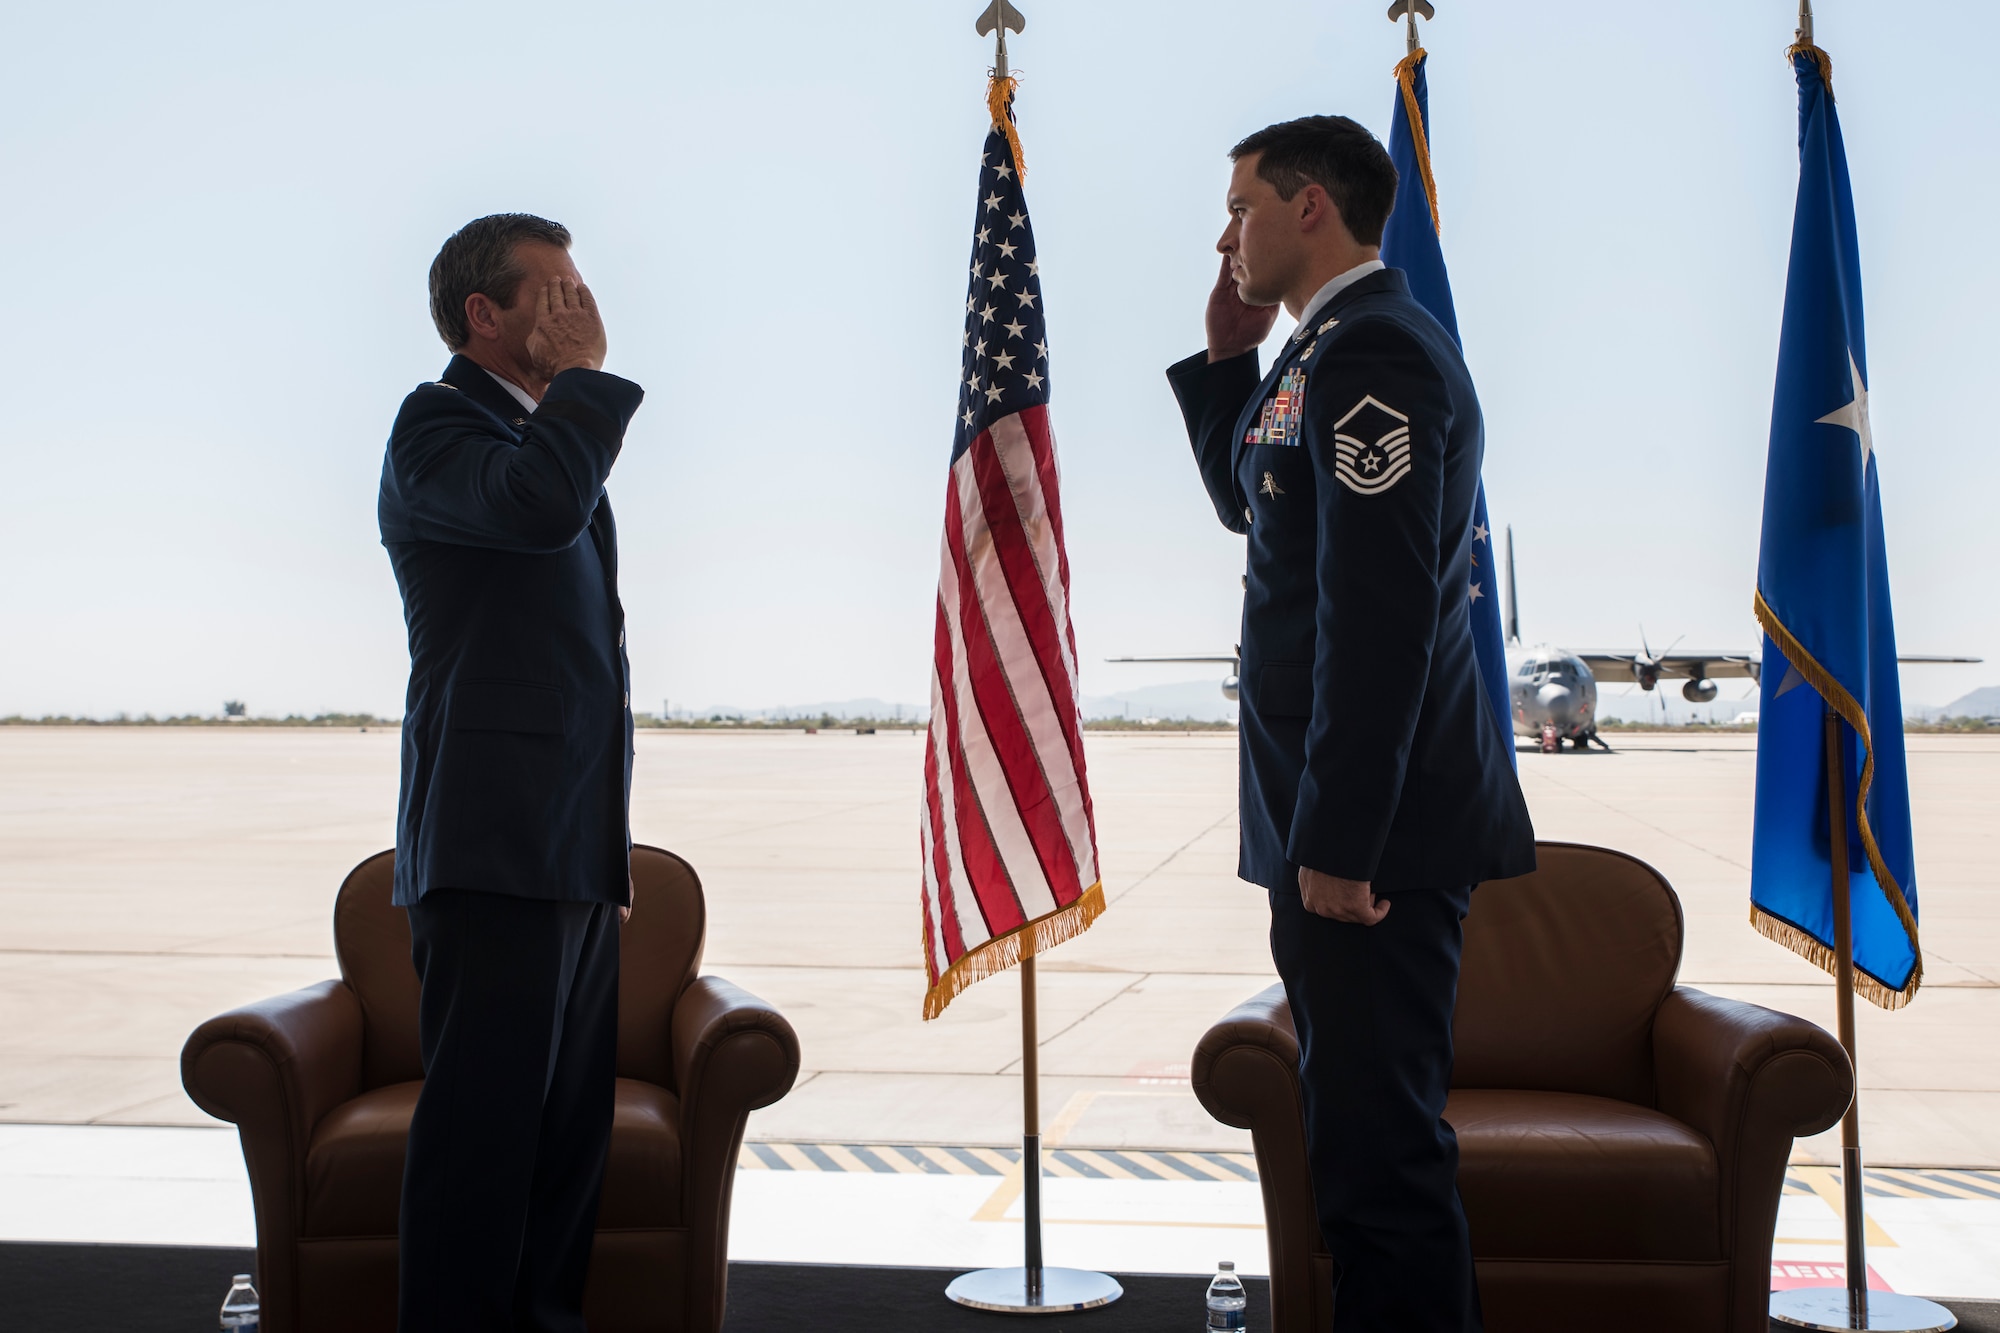 A photo of Airmen saluting during a medal presentation ceremony